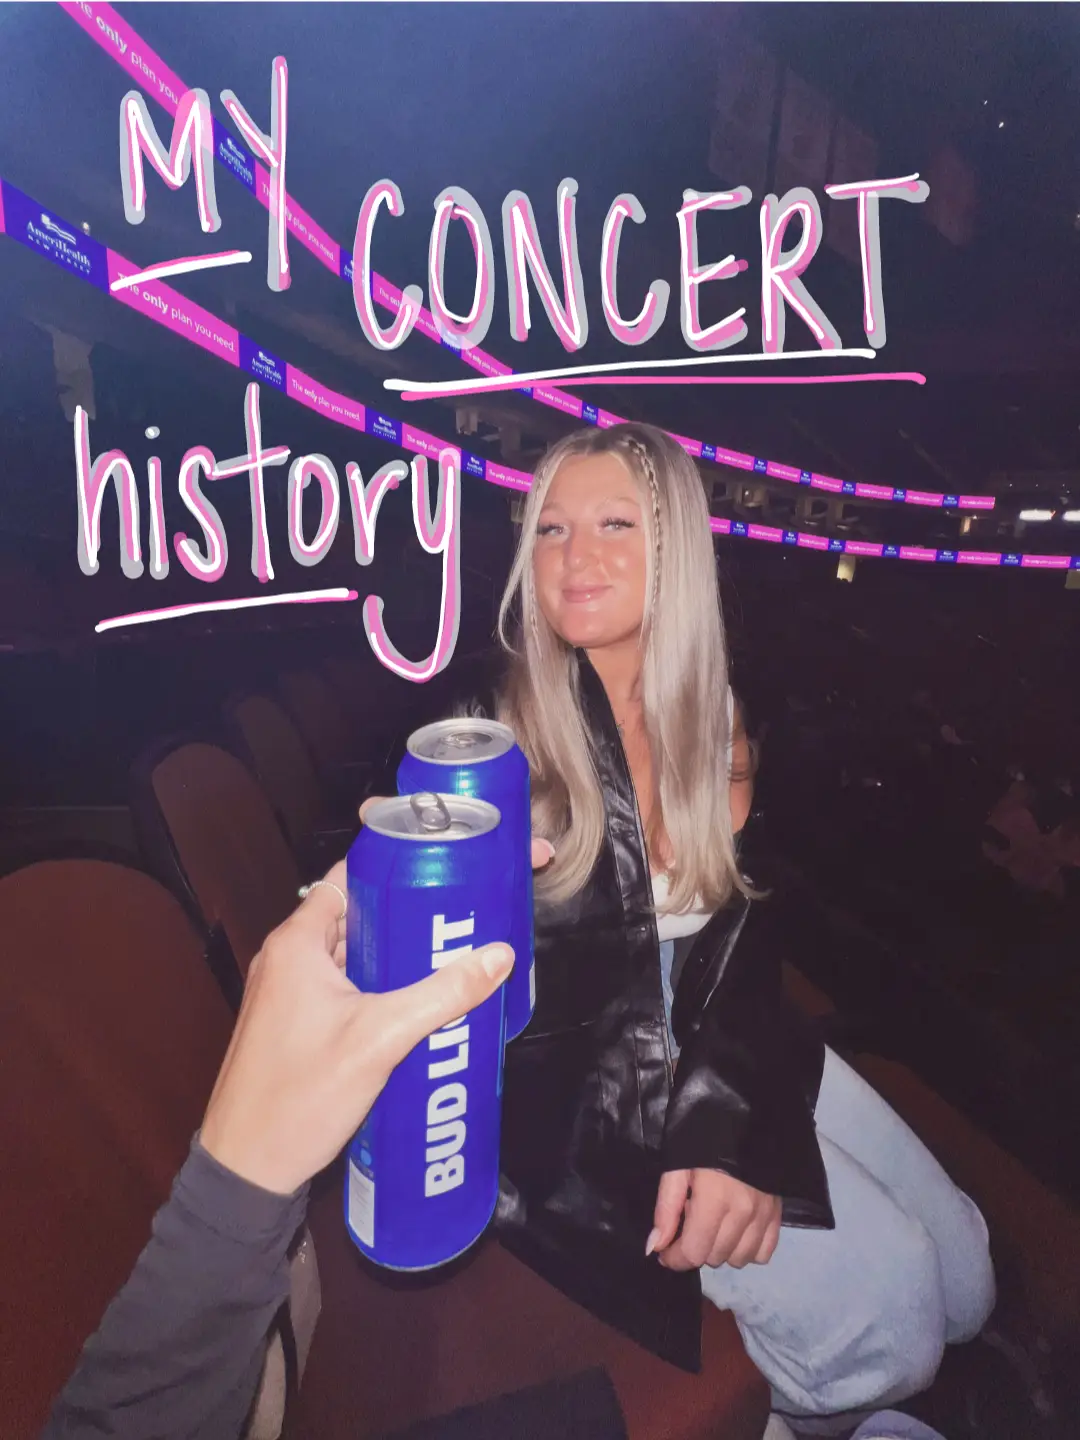  A woman is sitting in a row of seats at a concert. She is holding a can of Bud Light beer in her hand.